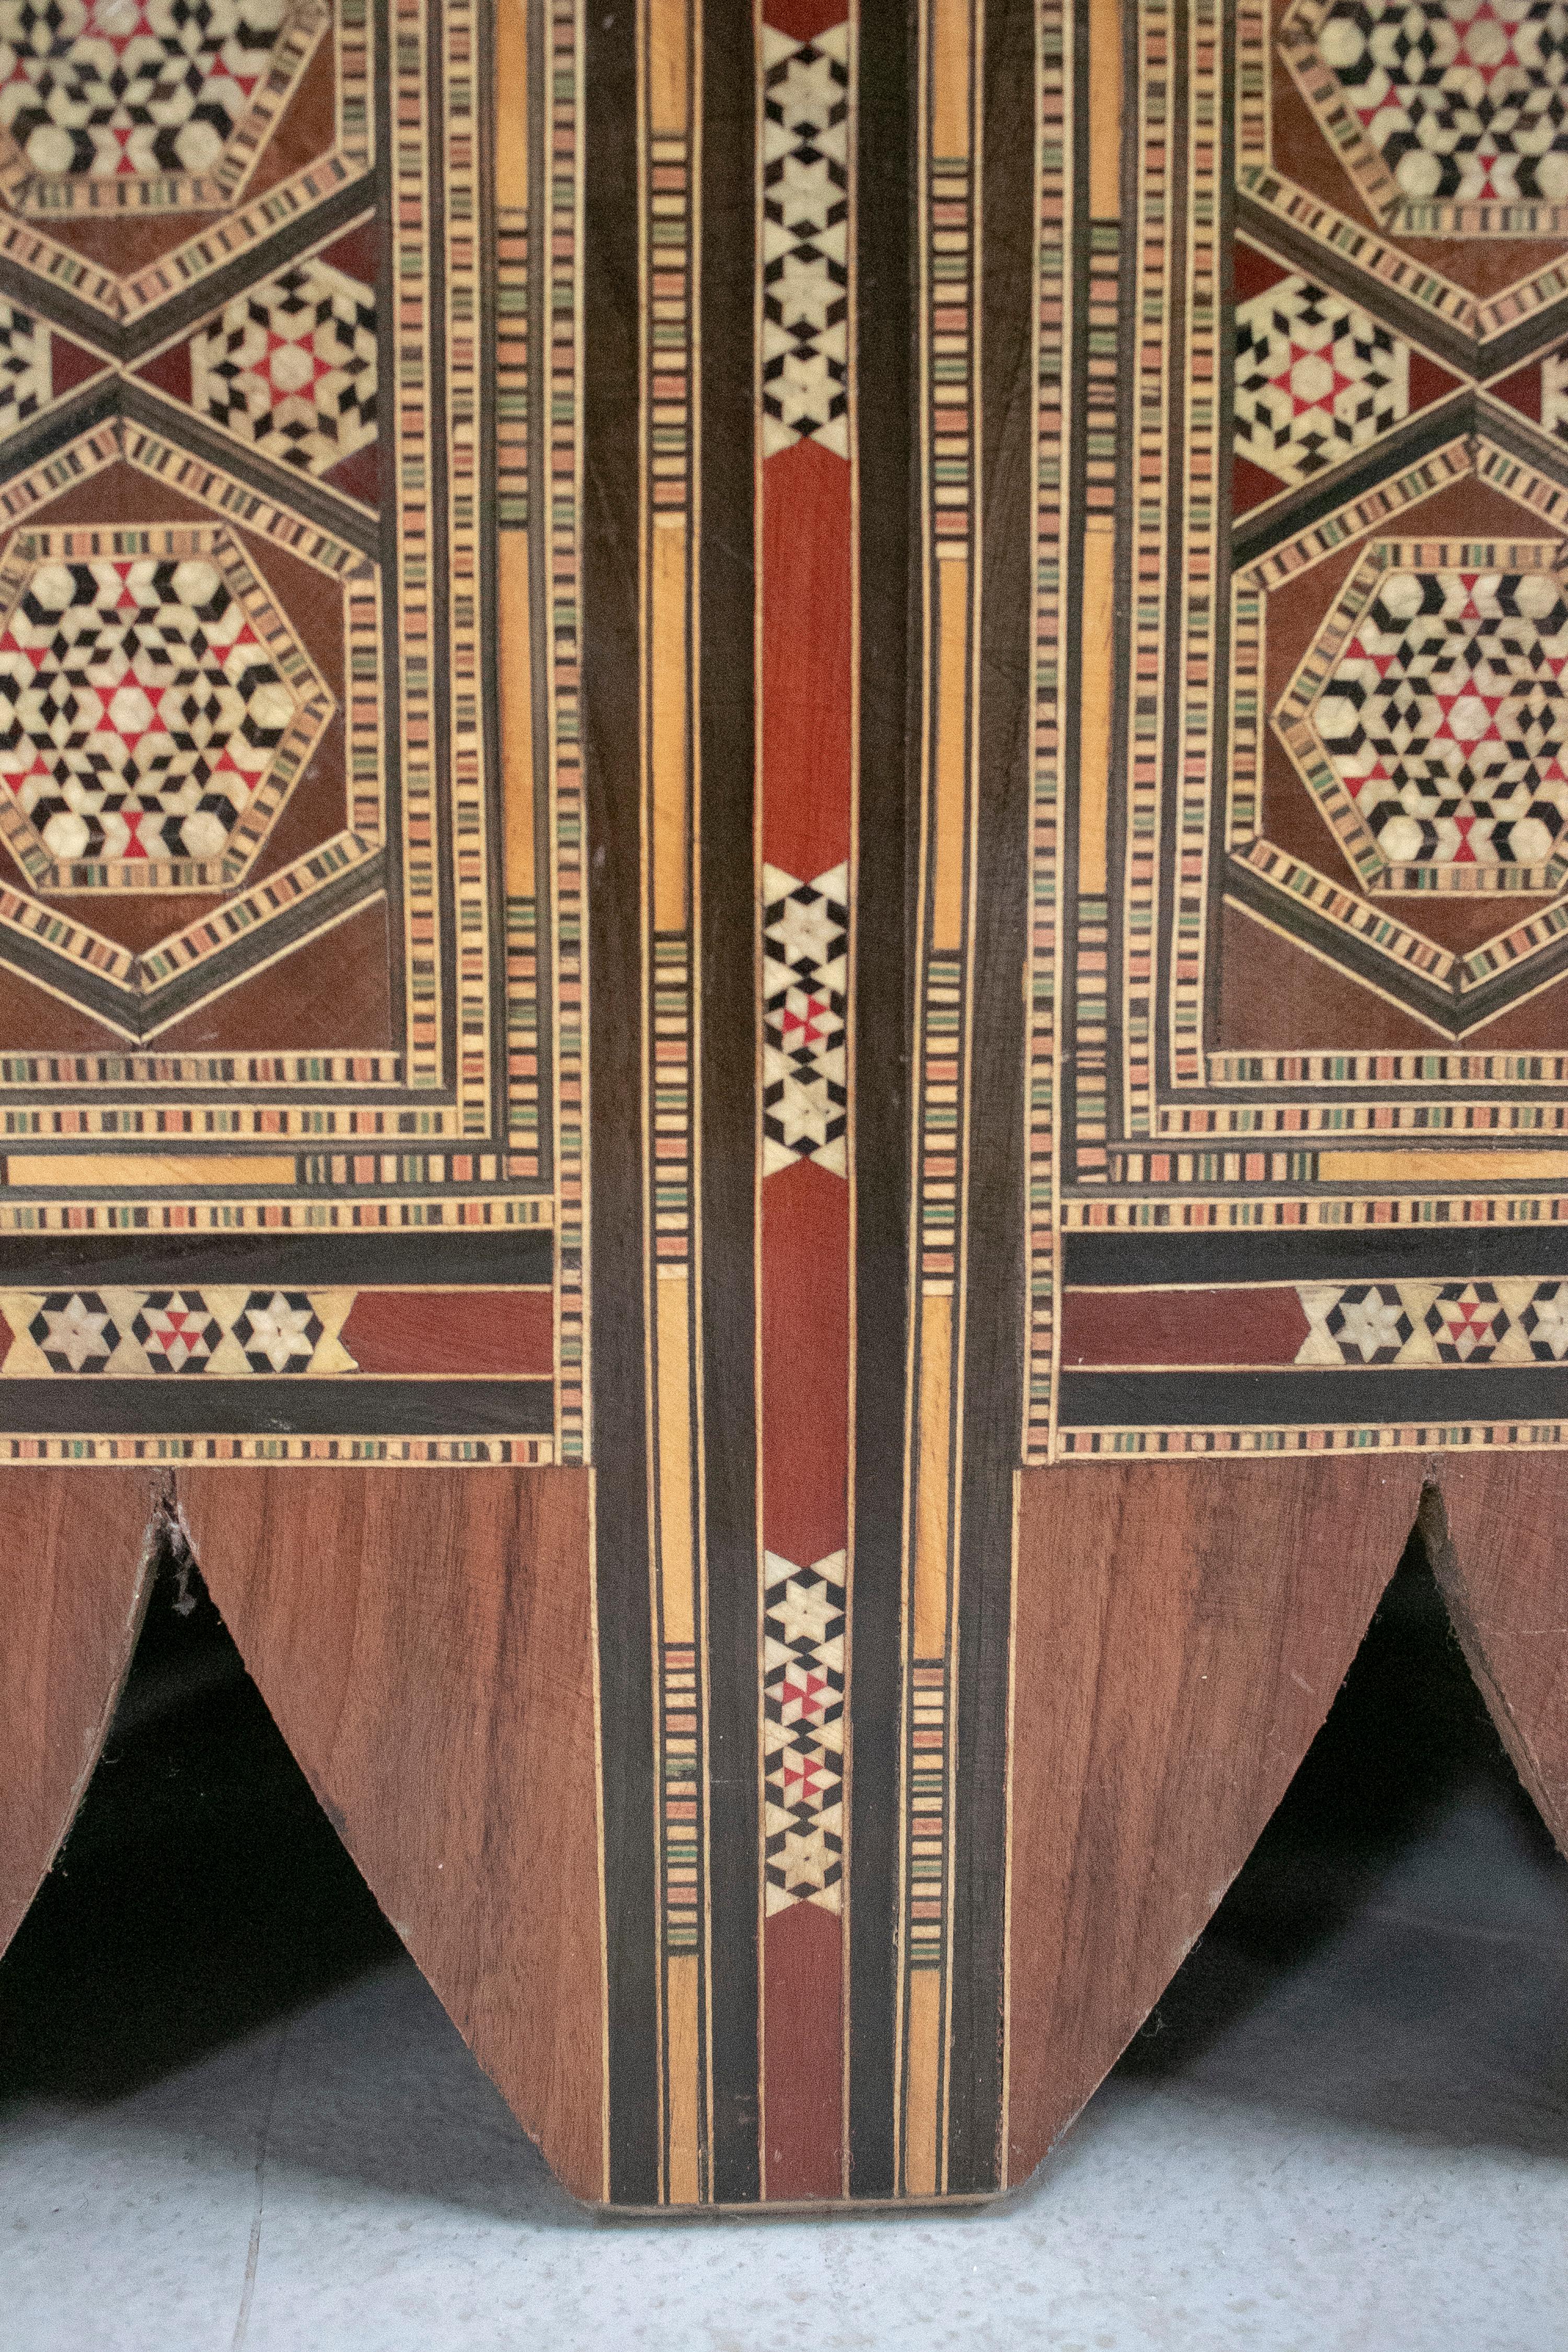 1980s Moroccan Inlay Wooden Table with Ornamental Geometric Decorations 10